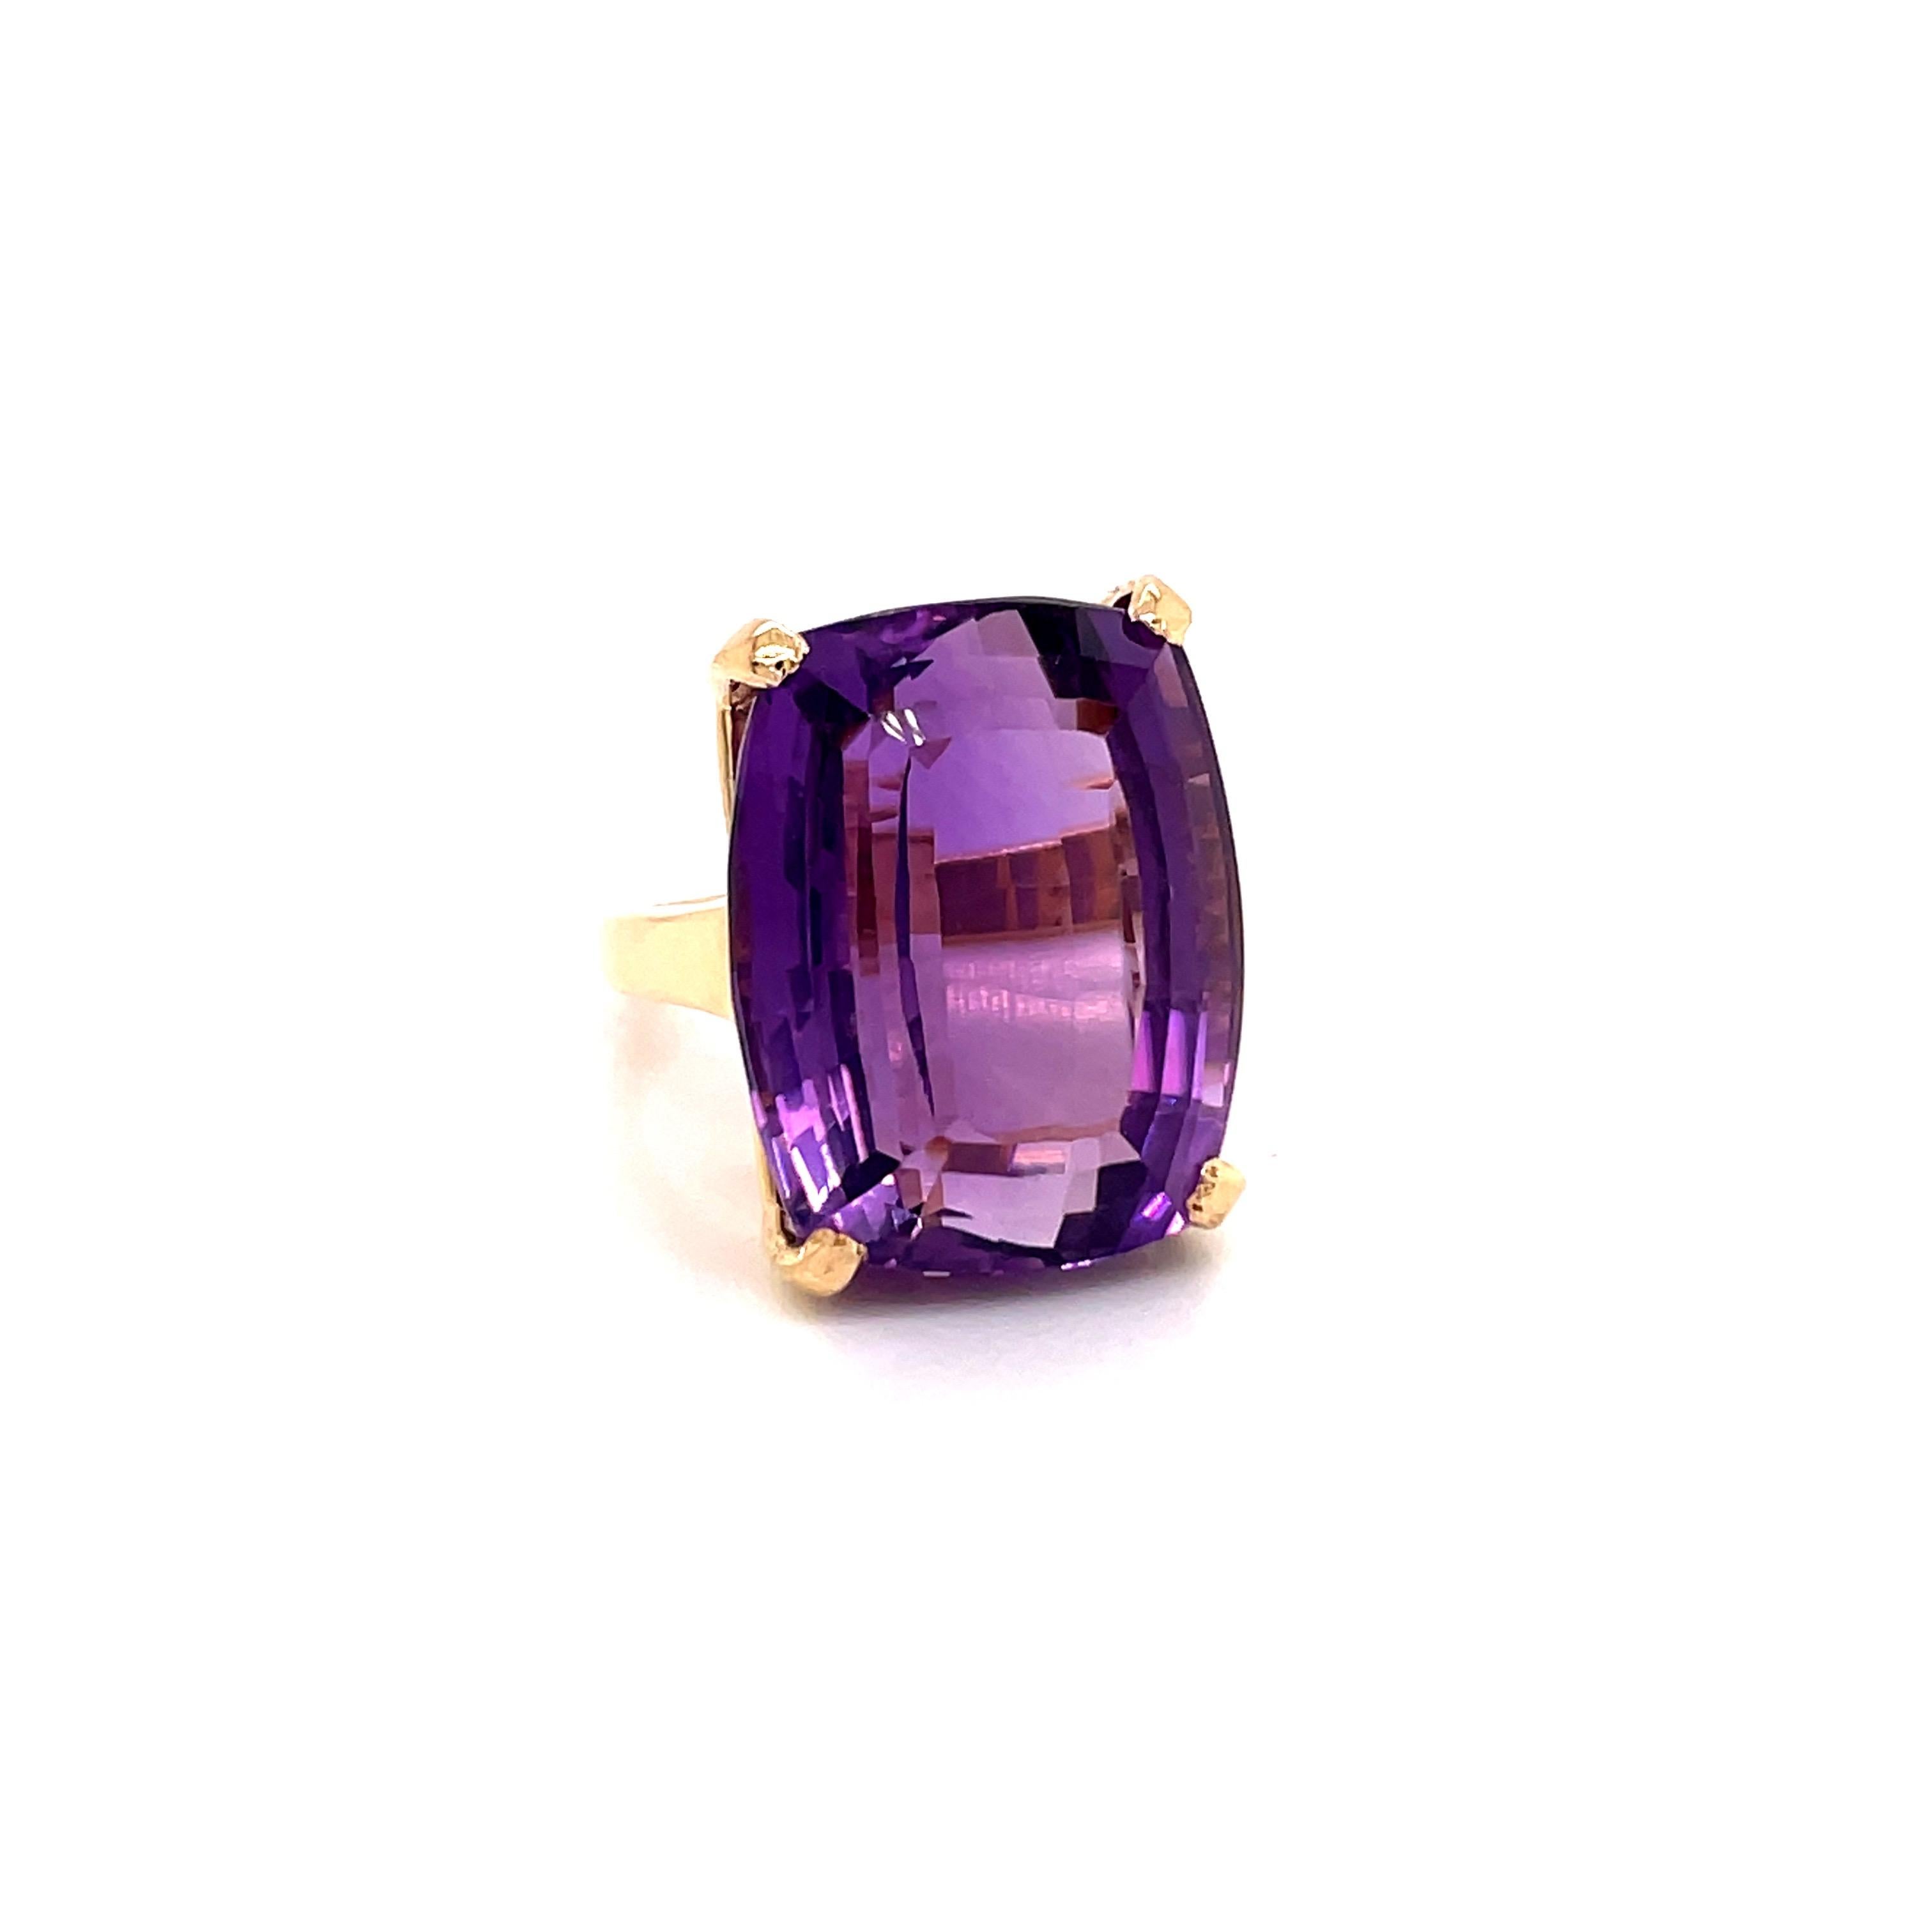 Vintage 1970's 35ct Cushion Cut Amethyst Ring - The amethyst weighs approximately 35ct and measures 23 x 18mm.  The setting is 14k yellow gold with a finger size 6.5 which can be sized upon request.  The ring weighs 17.6 grams